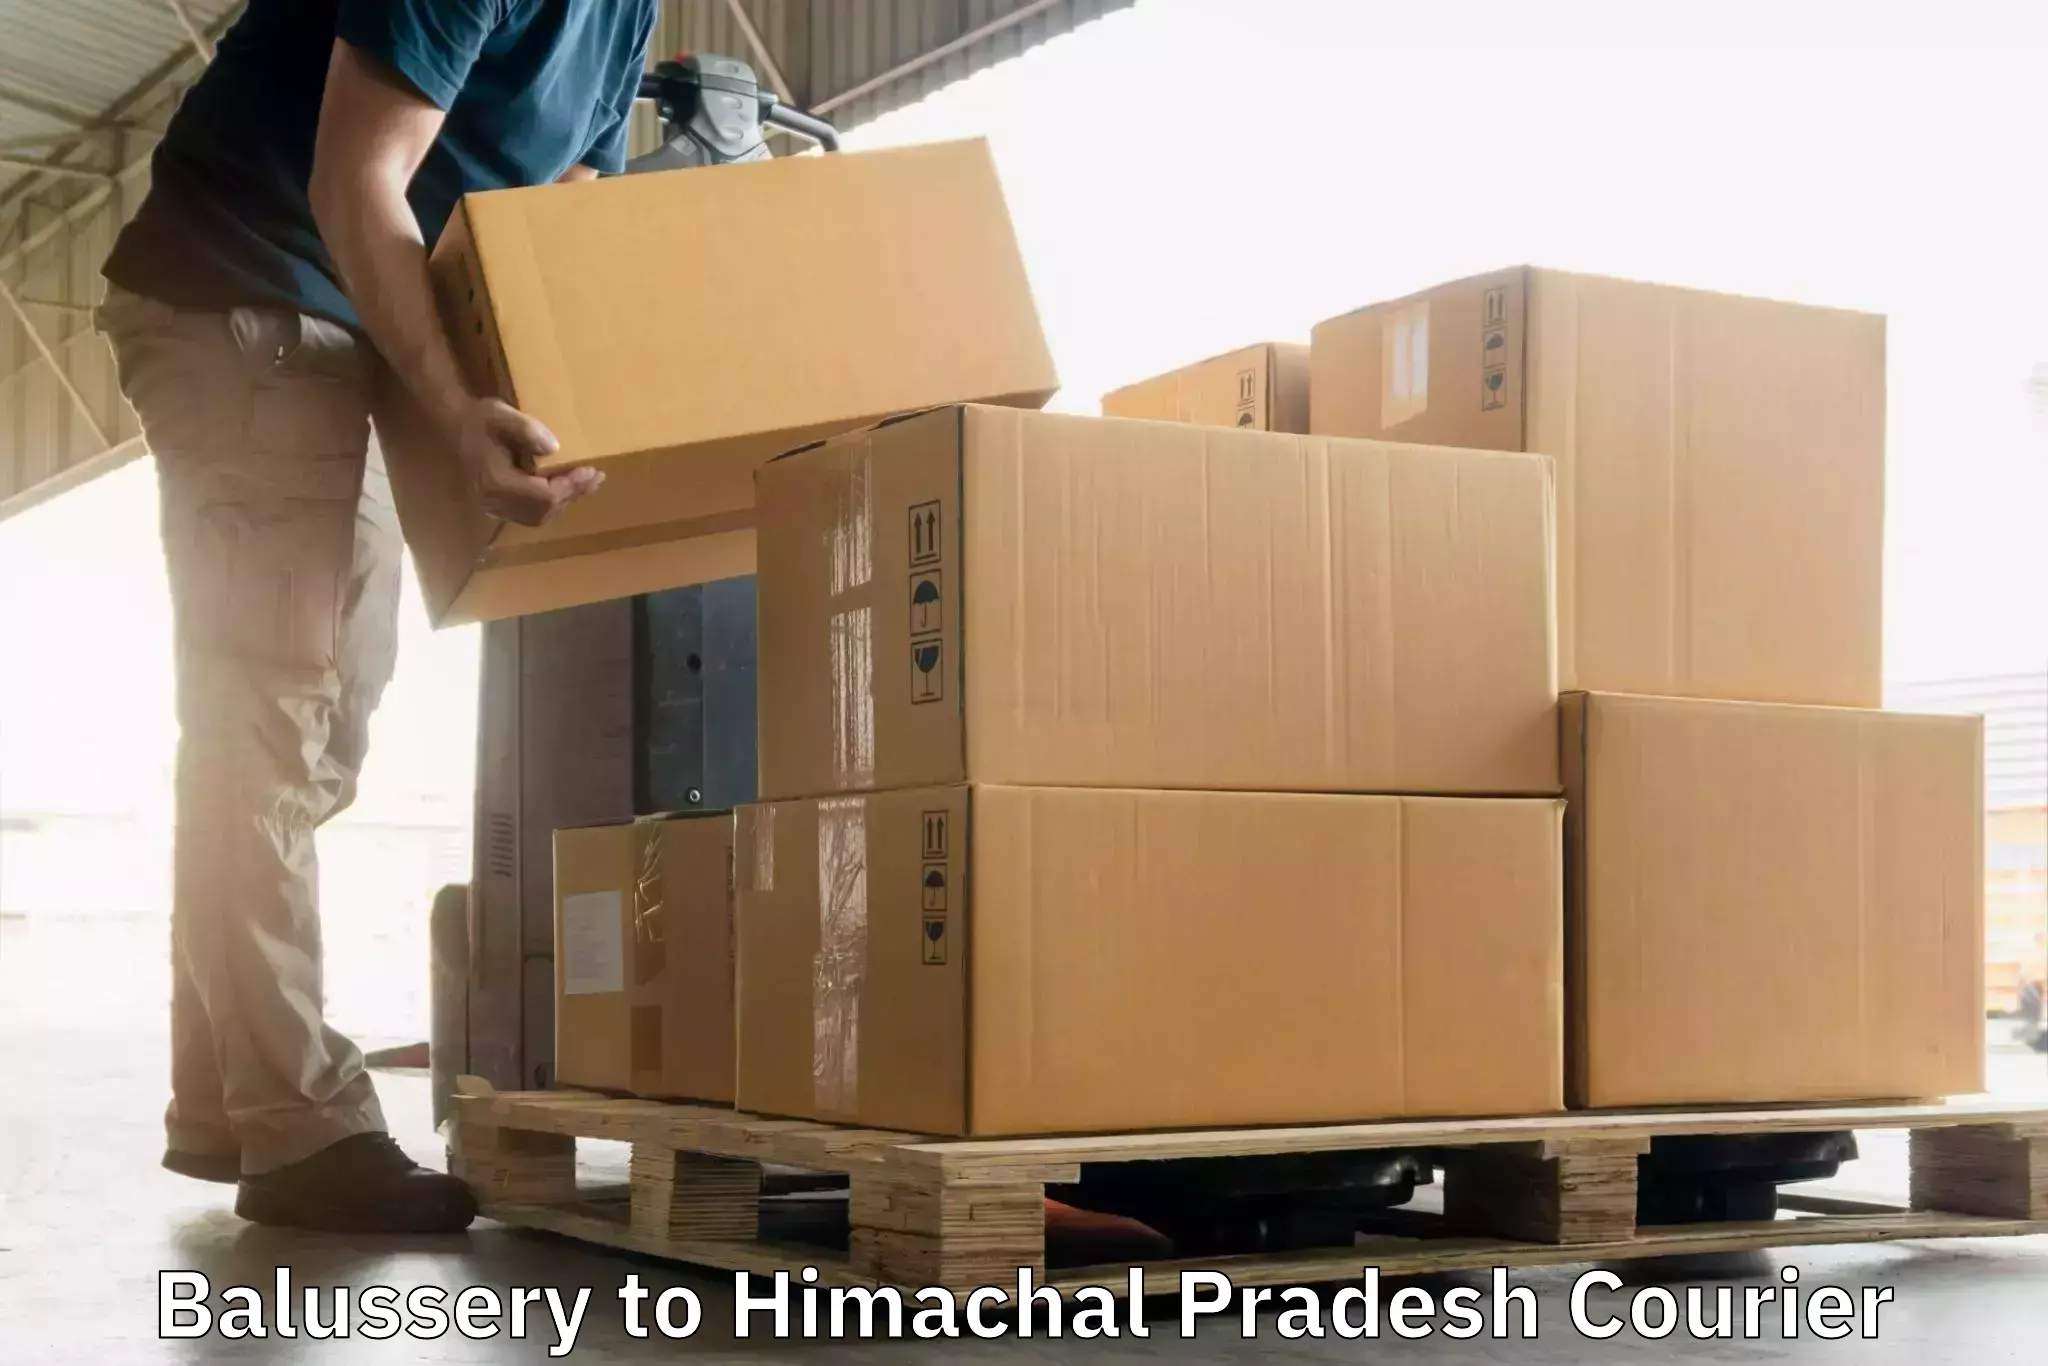 State-of-the-art courier technology Balussery to Jaisinghpur